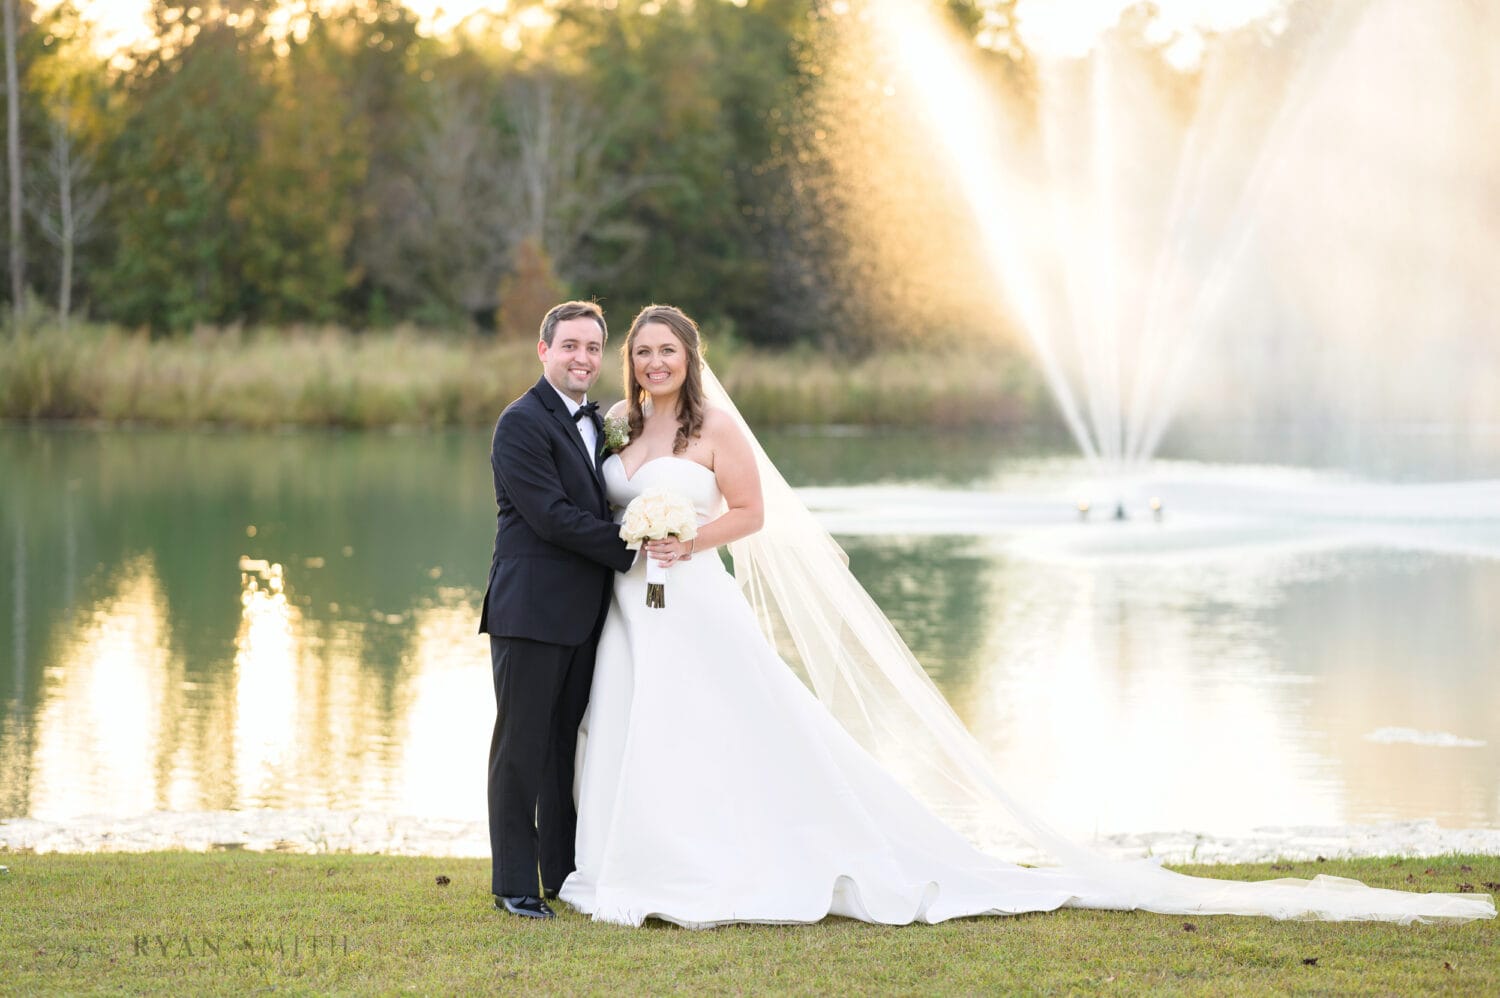 Bride and groom portrait in front of the lake fountain - The Venue at White Oaks Farm